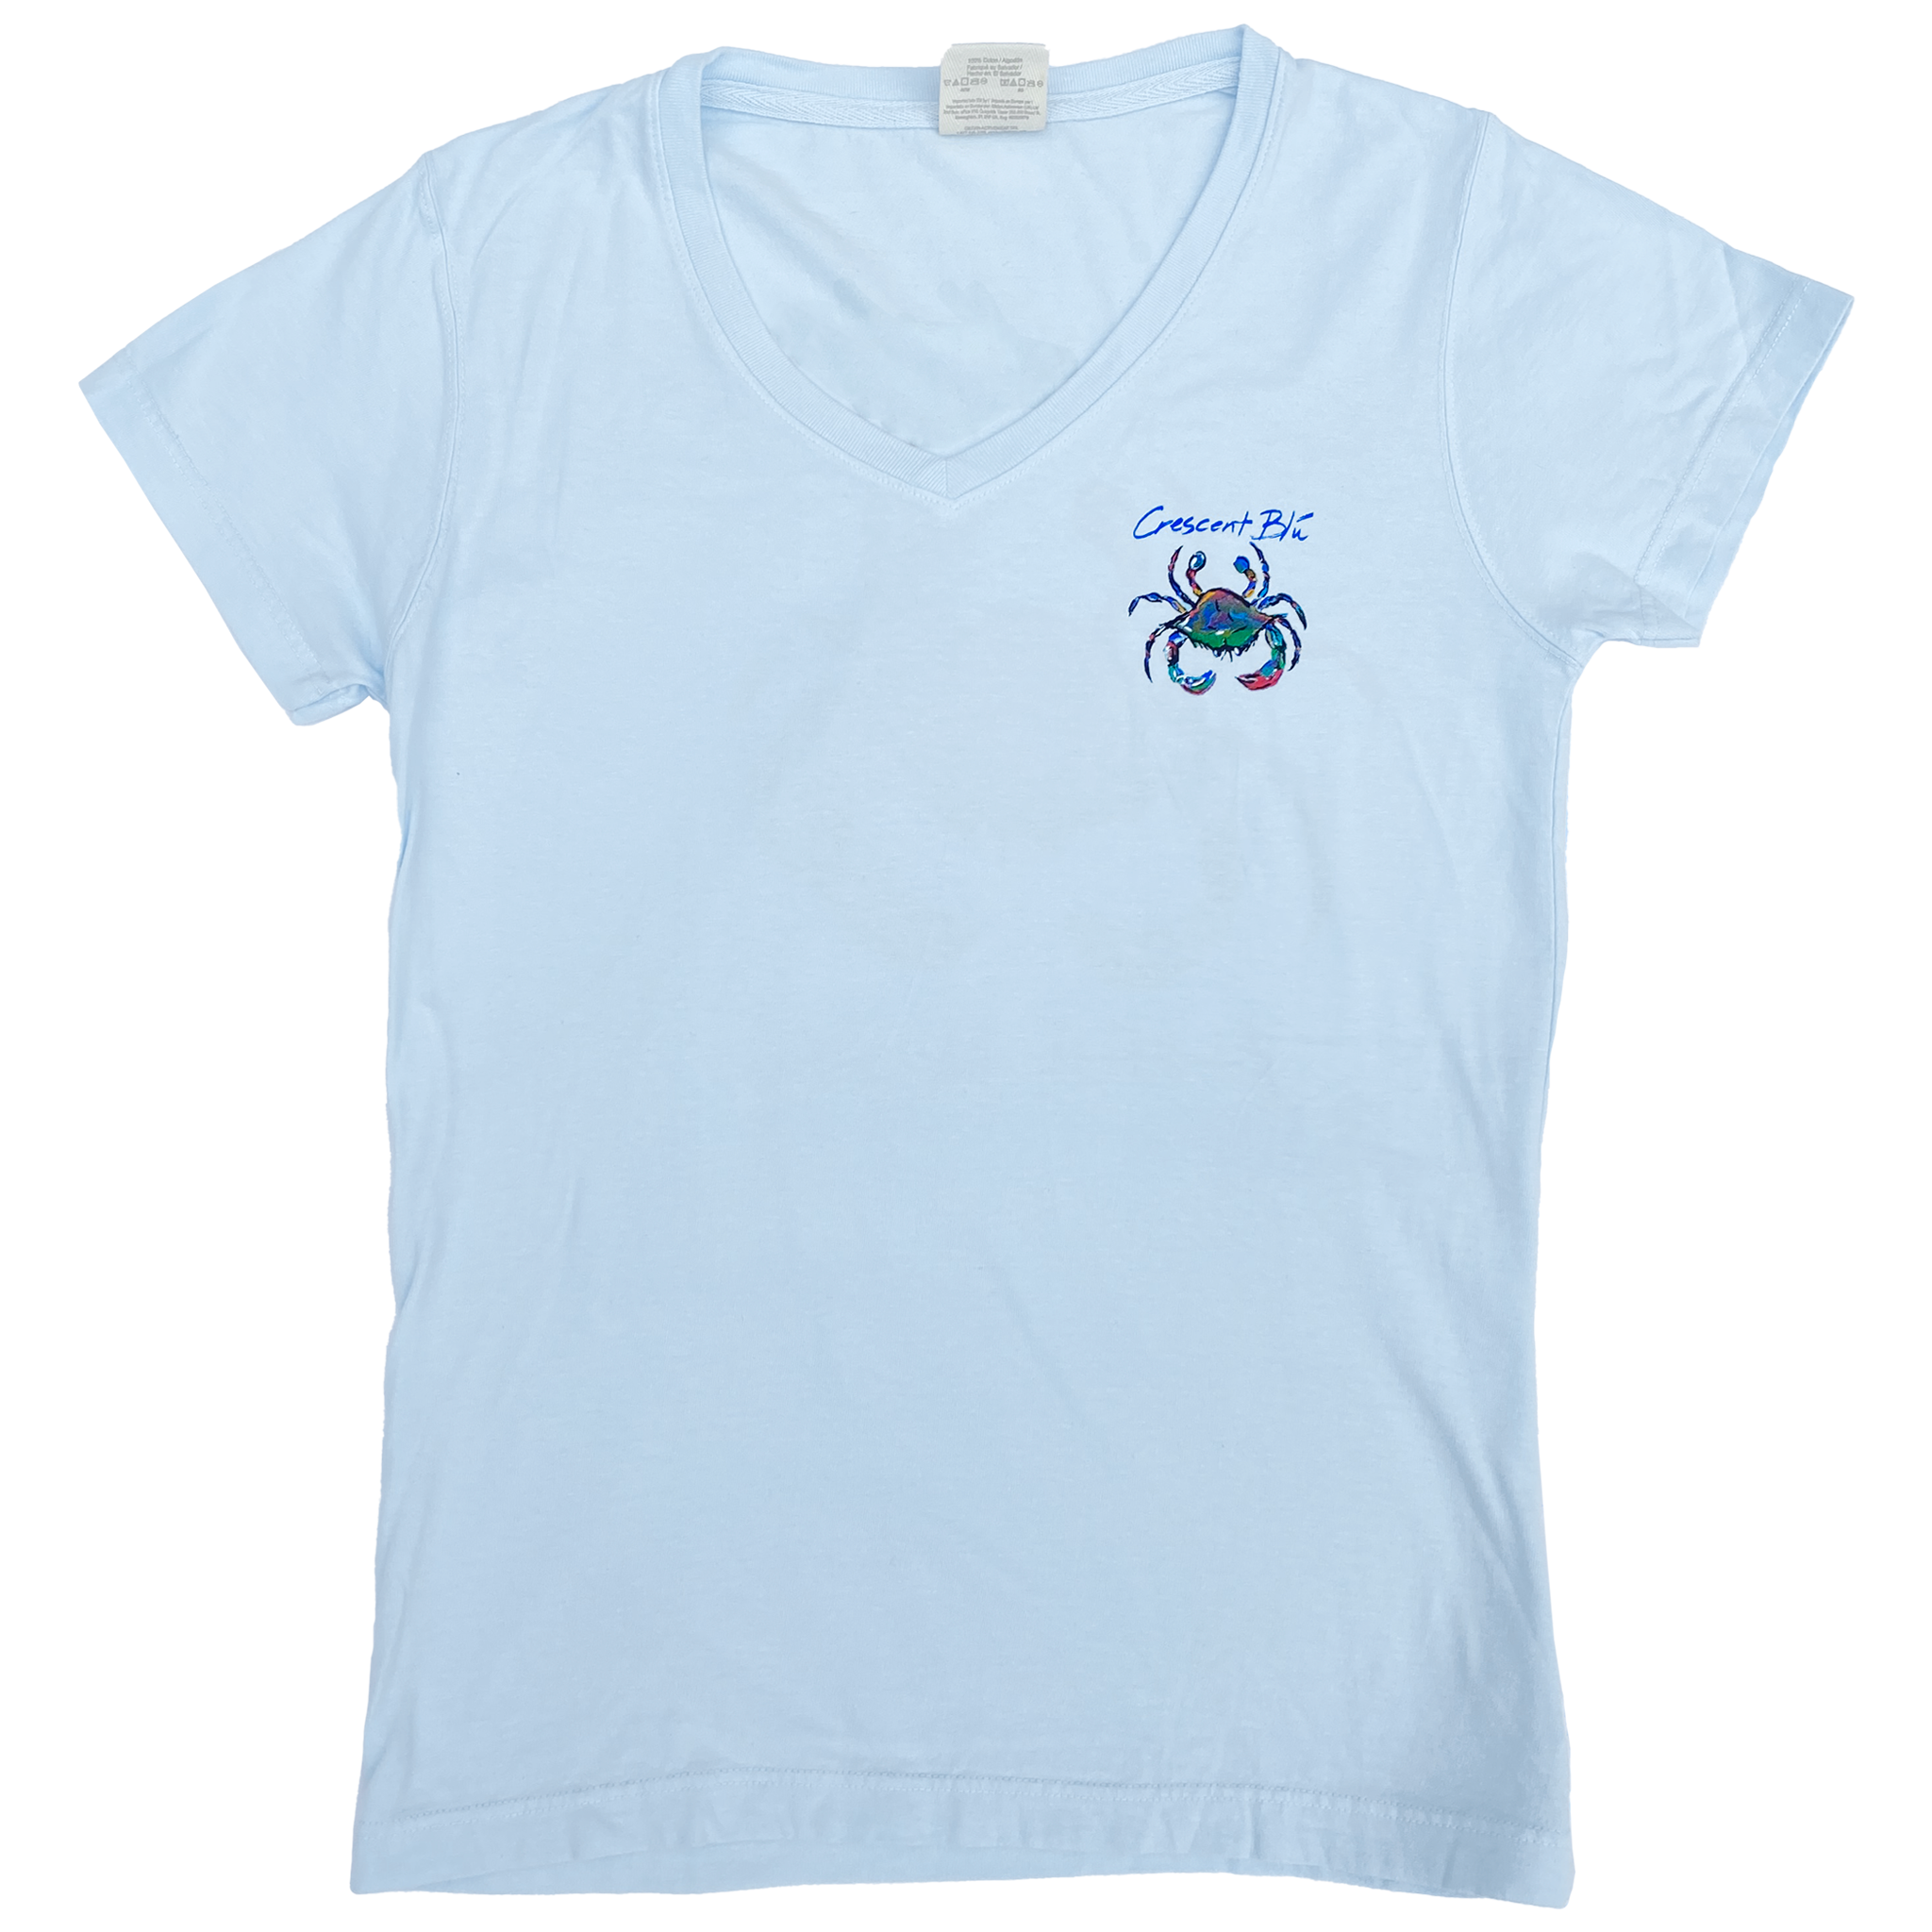 Front view of a chambray colored Ladies cut short sleeve T-shirt with small Crescent Blu multi-colored Signature crab printed on the left upper chest